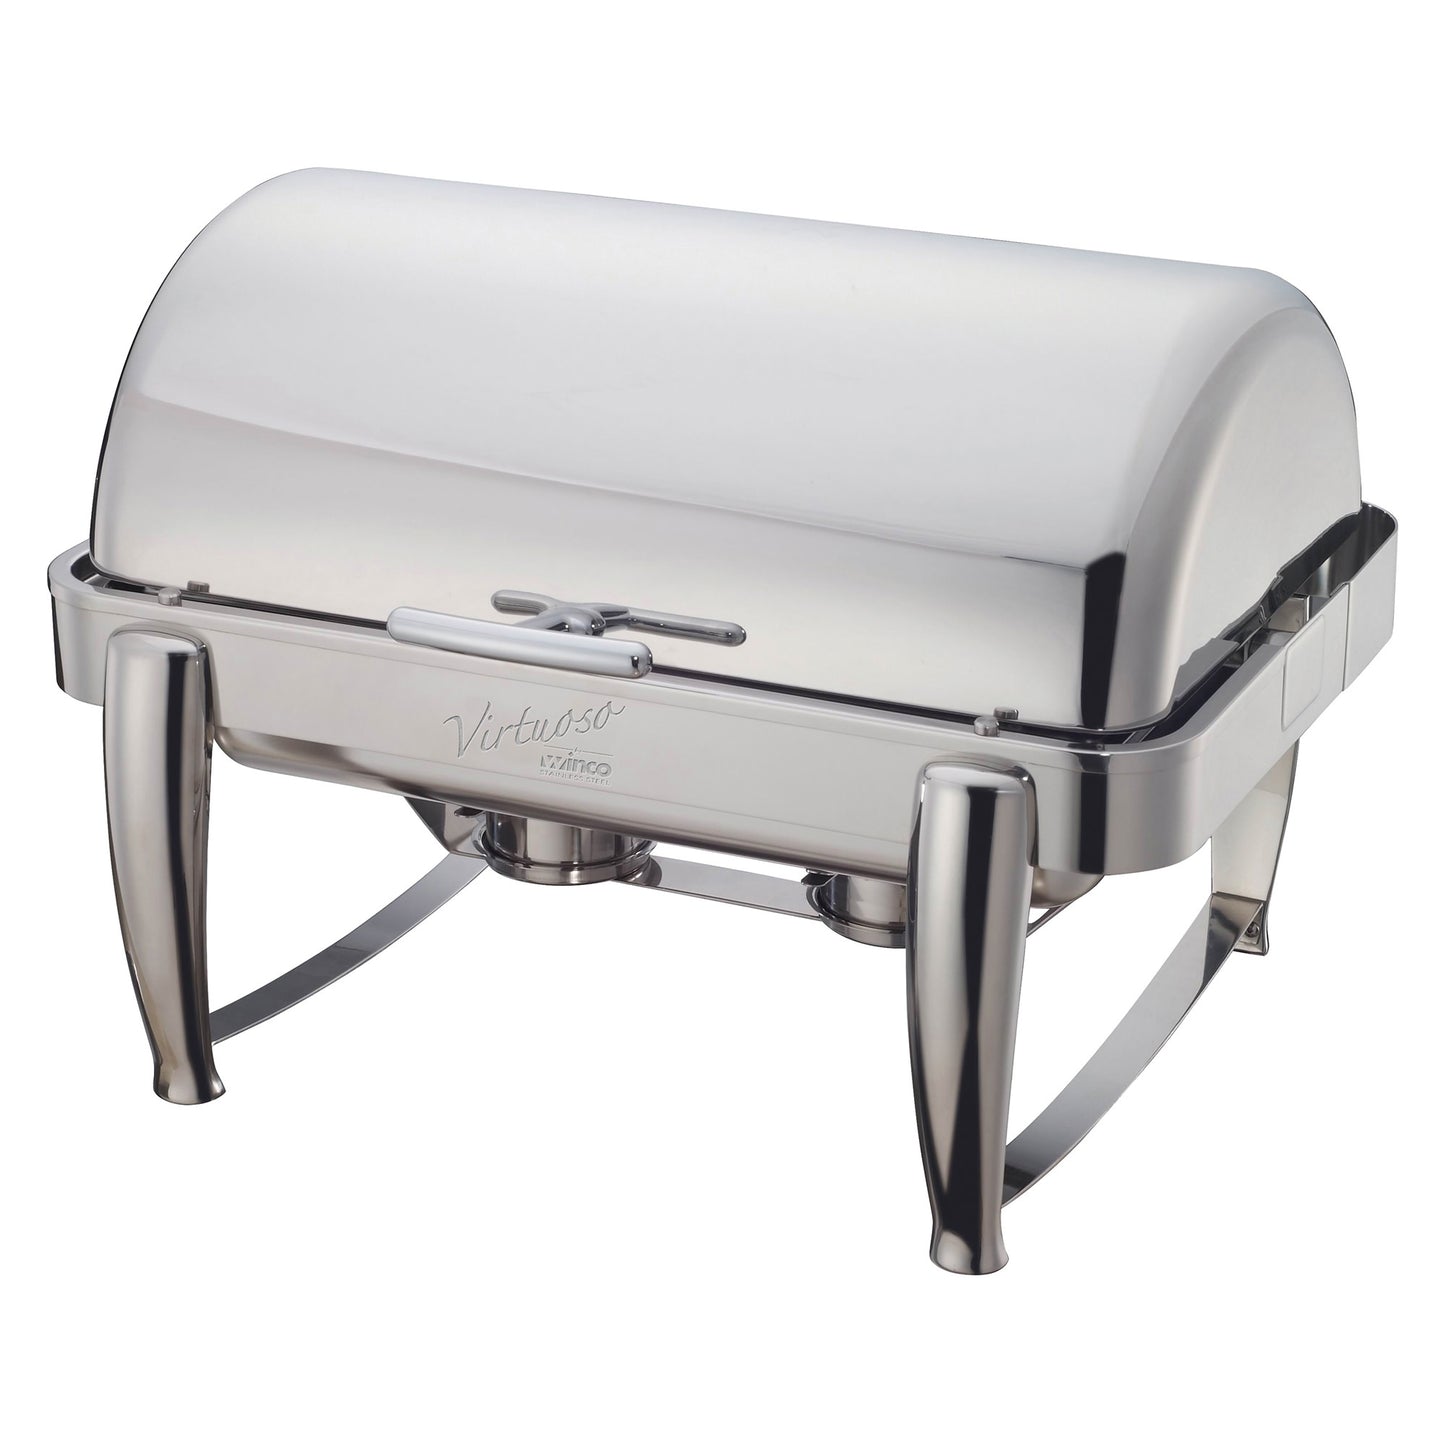 101B - Virtuoso Collection 8 Quart Full-size Roll-Top Chafer, Extra Heavyweight